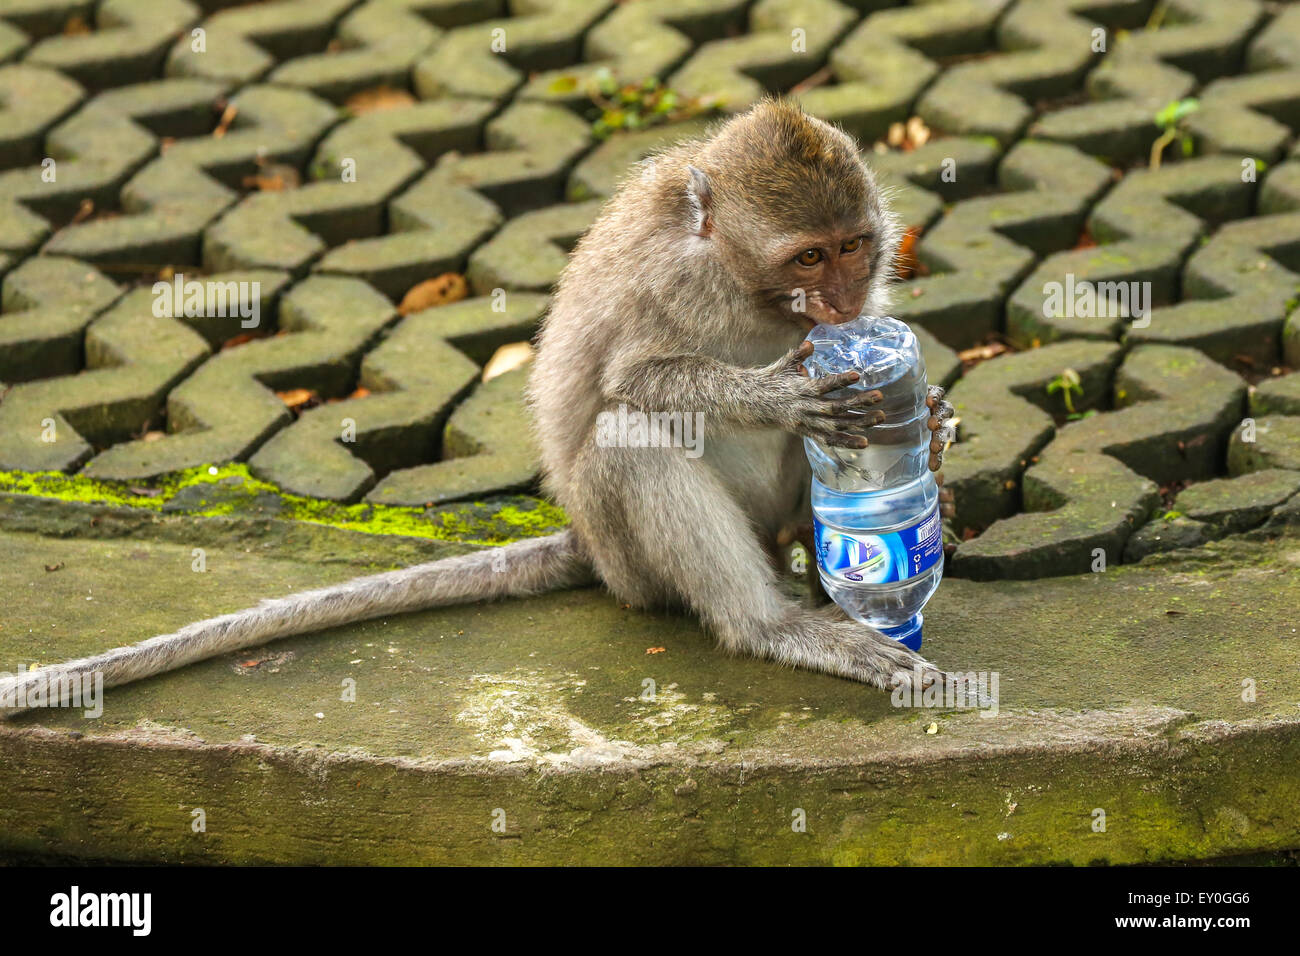 small brown monkey playing with a plastic bottle of water while sitting down. horizontal image. Stock Photo